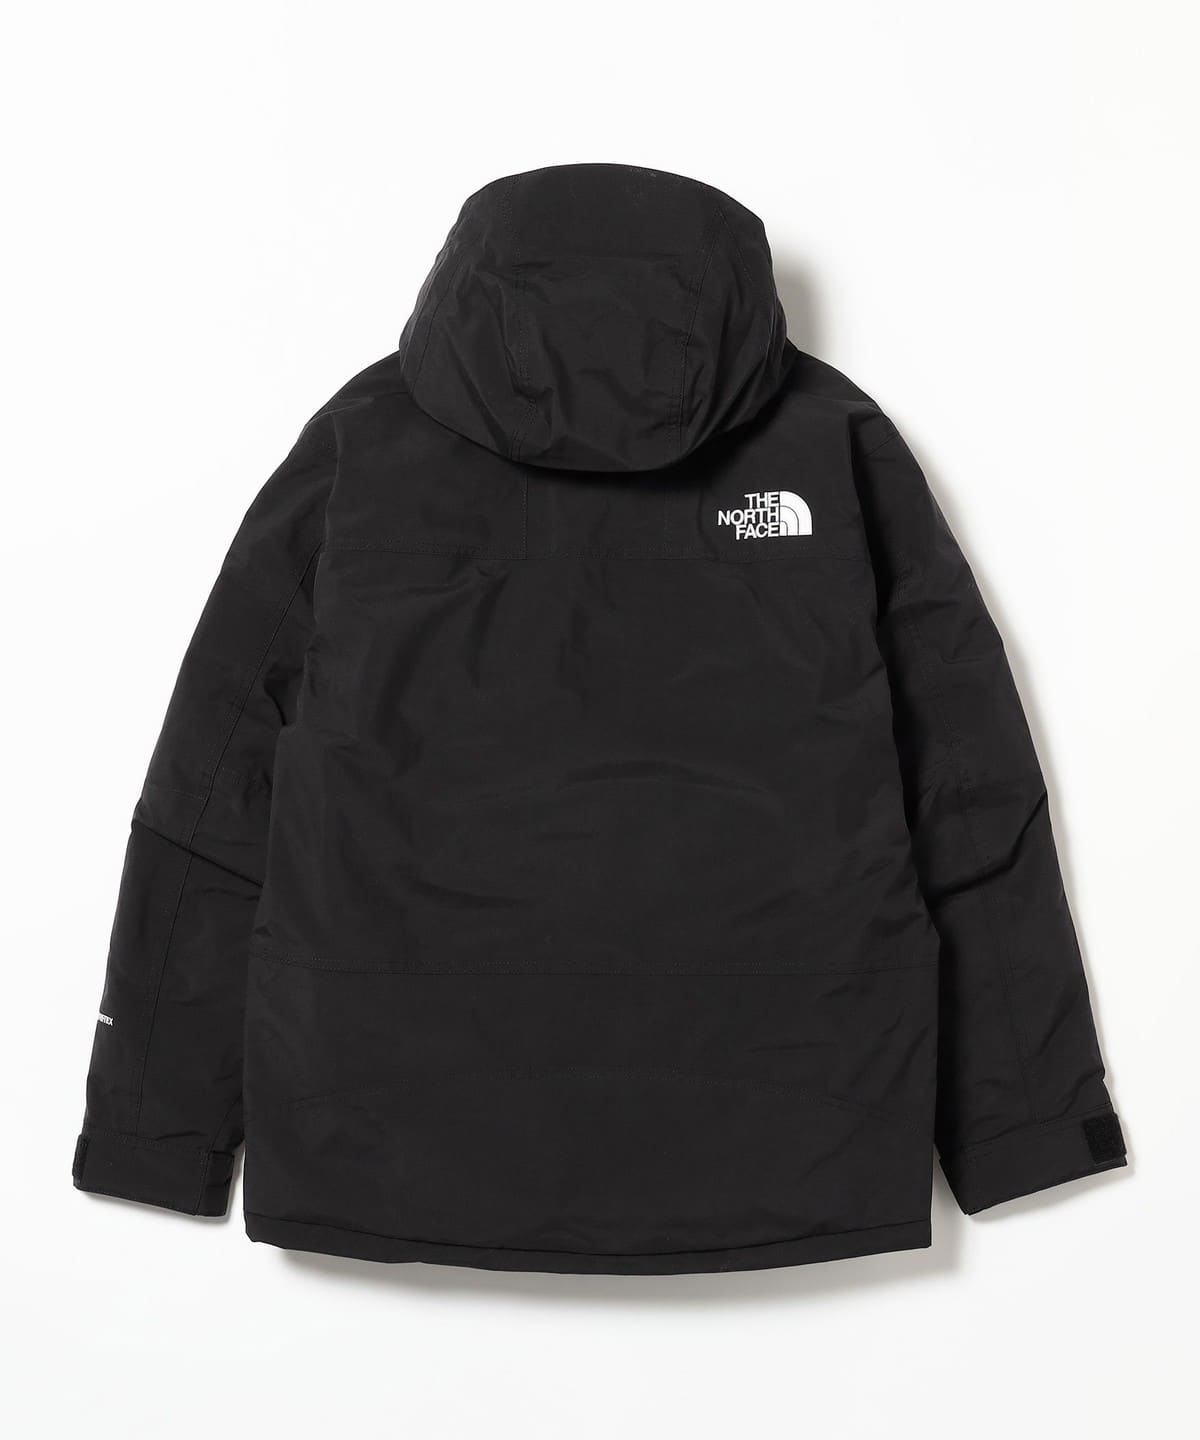 NORTH FACE ×beams insulated jacketダウン